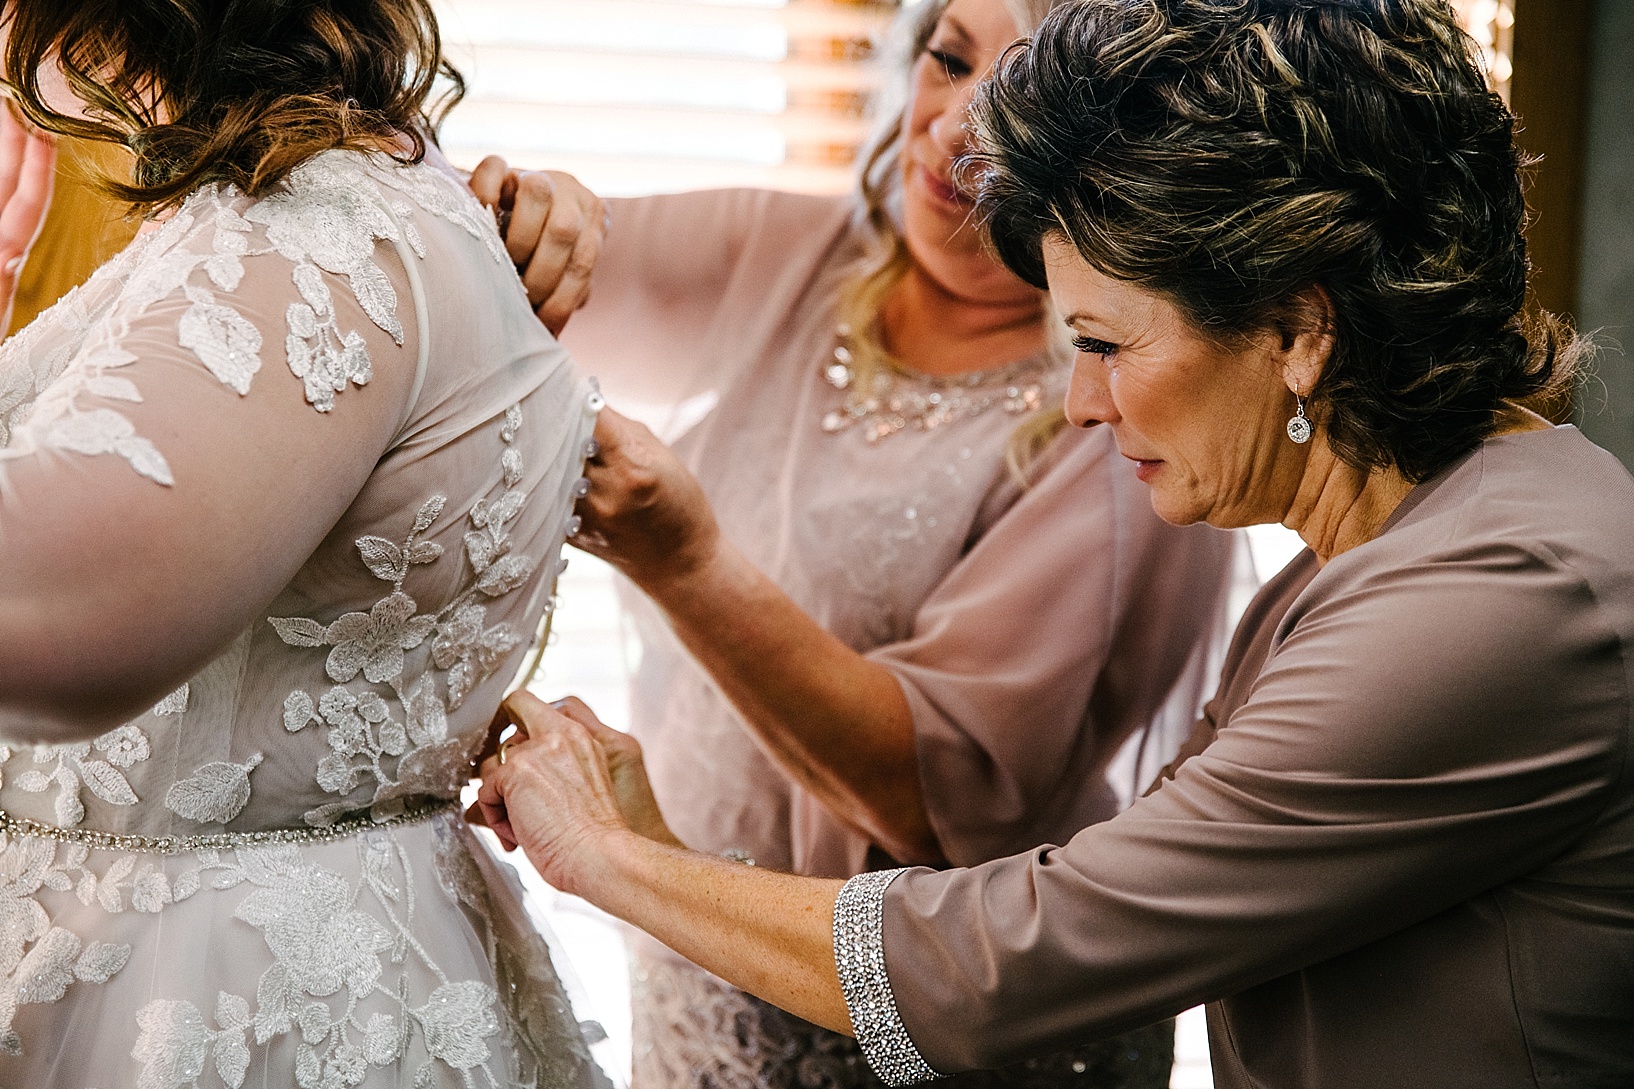 mother of the bride buttoning bride's dress